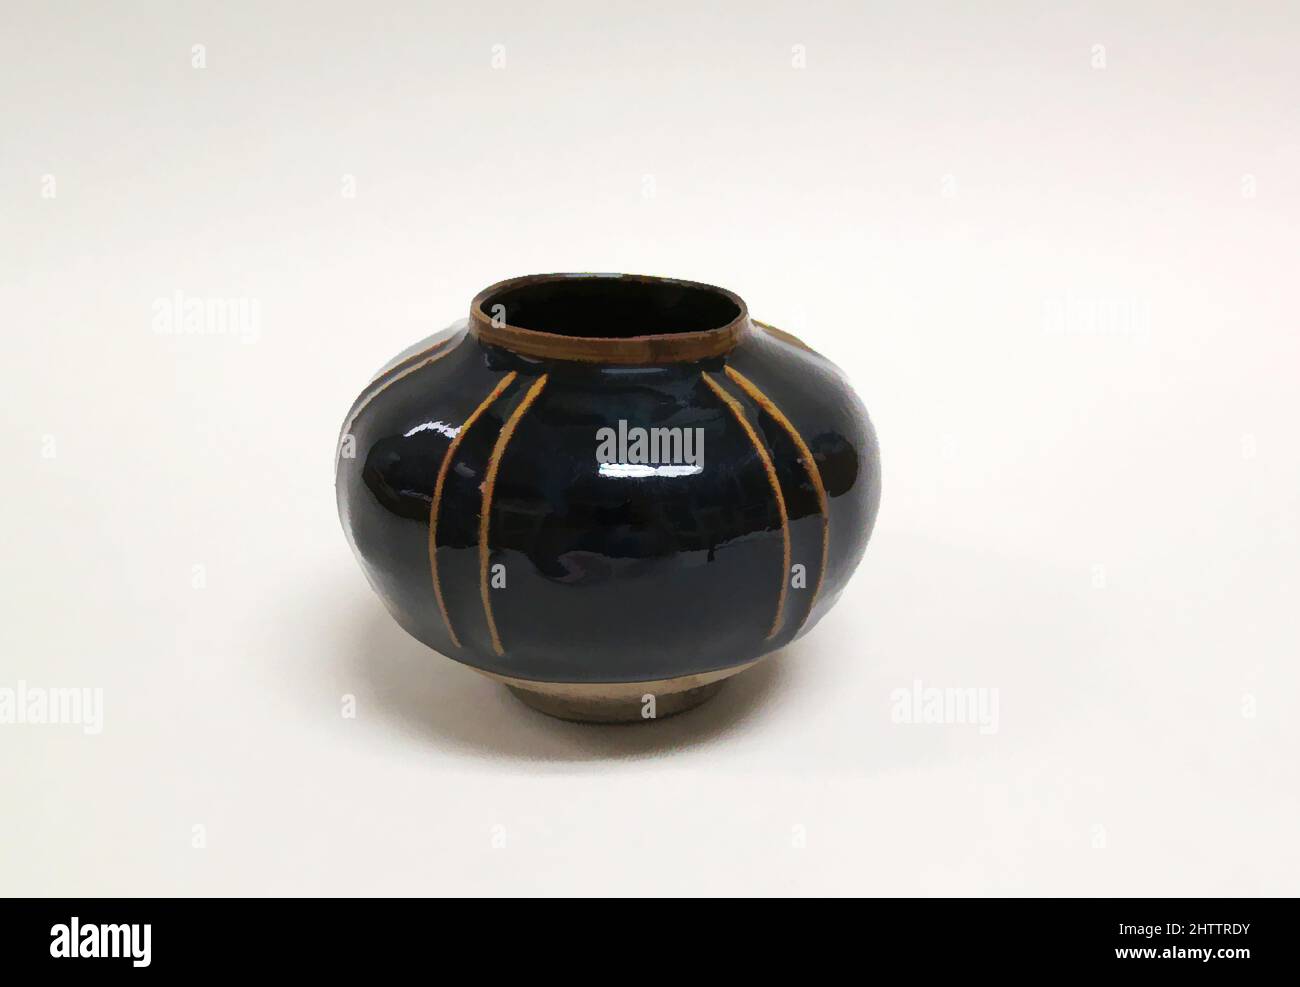 Art inspired by 北宋 磁州窯黑釉罐, Jar, Northern Song dynasty (960–1127), China, Stoneware with brown-black glaze (Cizhou ware), H. 3 1/4 in. (8 cm), Ceramics, Classic works modernized by Artotop with a splash of modernity. Shapes, color and value, eye-catching visual impact on art. Emotions through freedom of artworks in a contemporary way. A timeless message pursuing a wildly creative new direction. Artists turning to the digital medium and creating the Artotop NFT Stock Photo